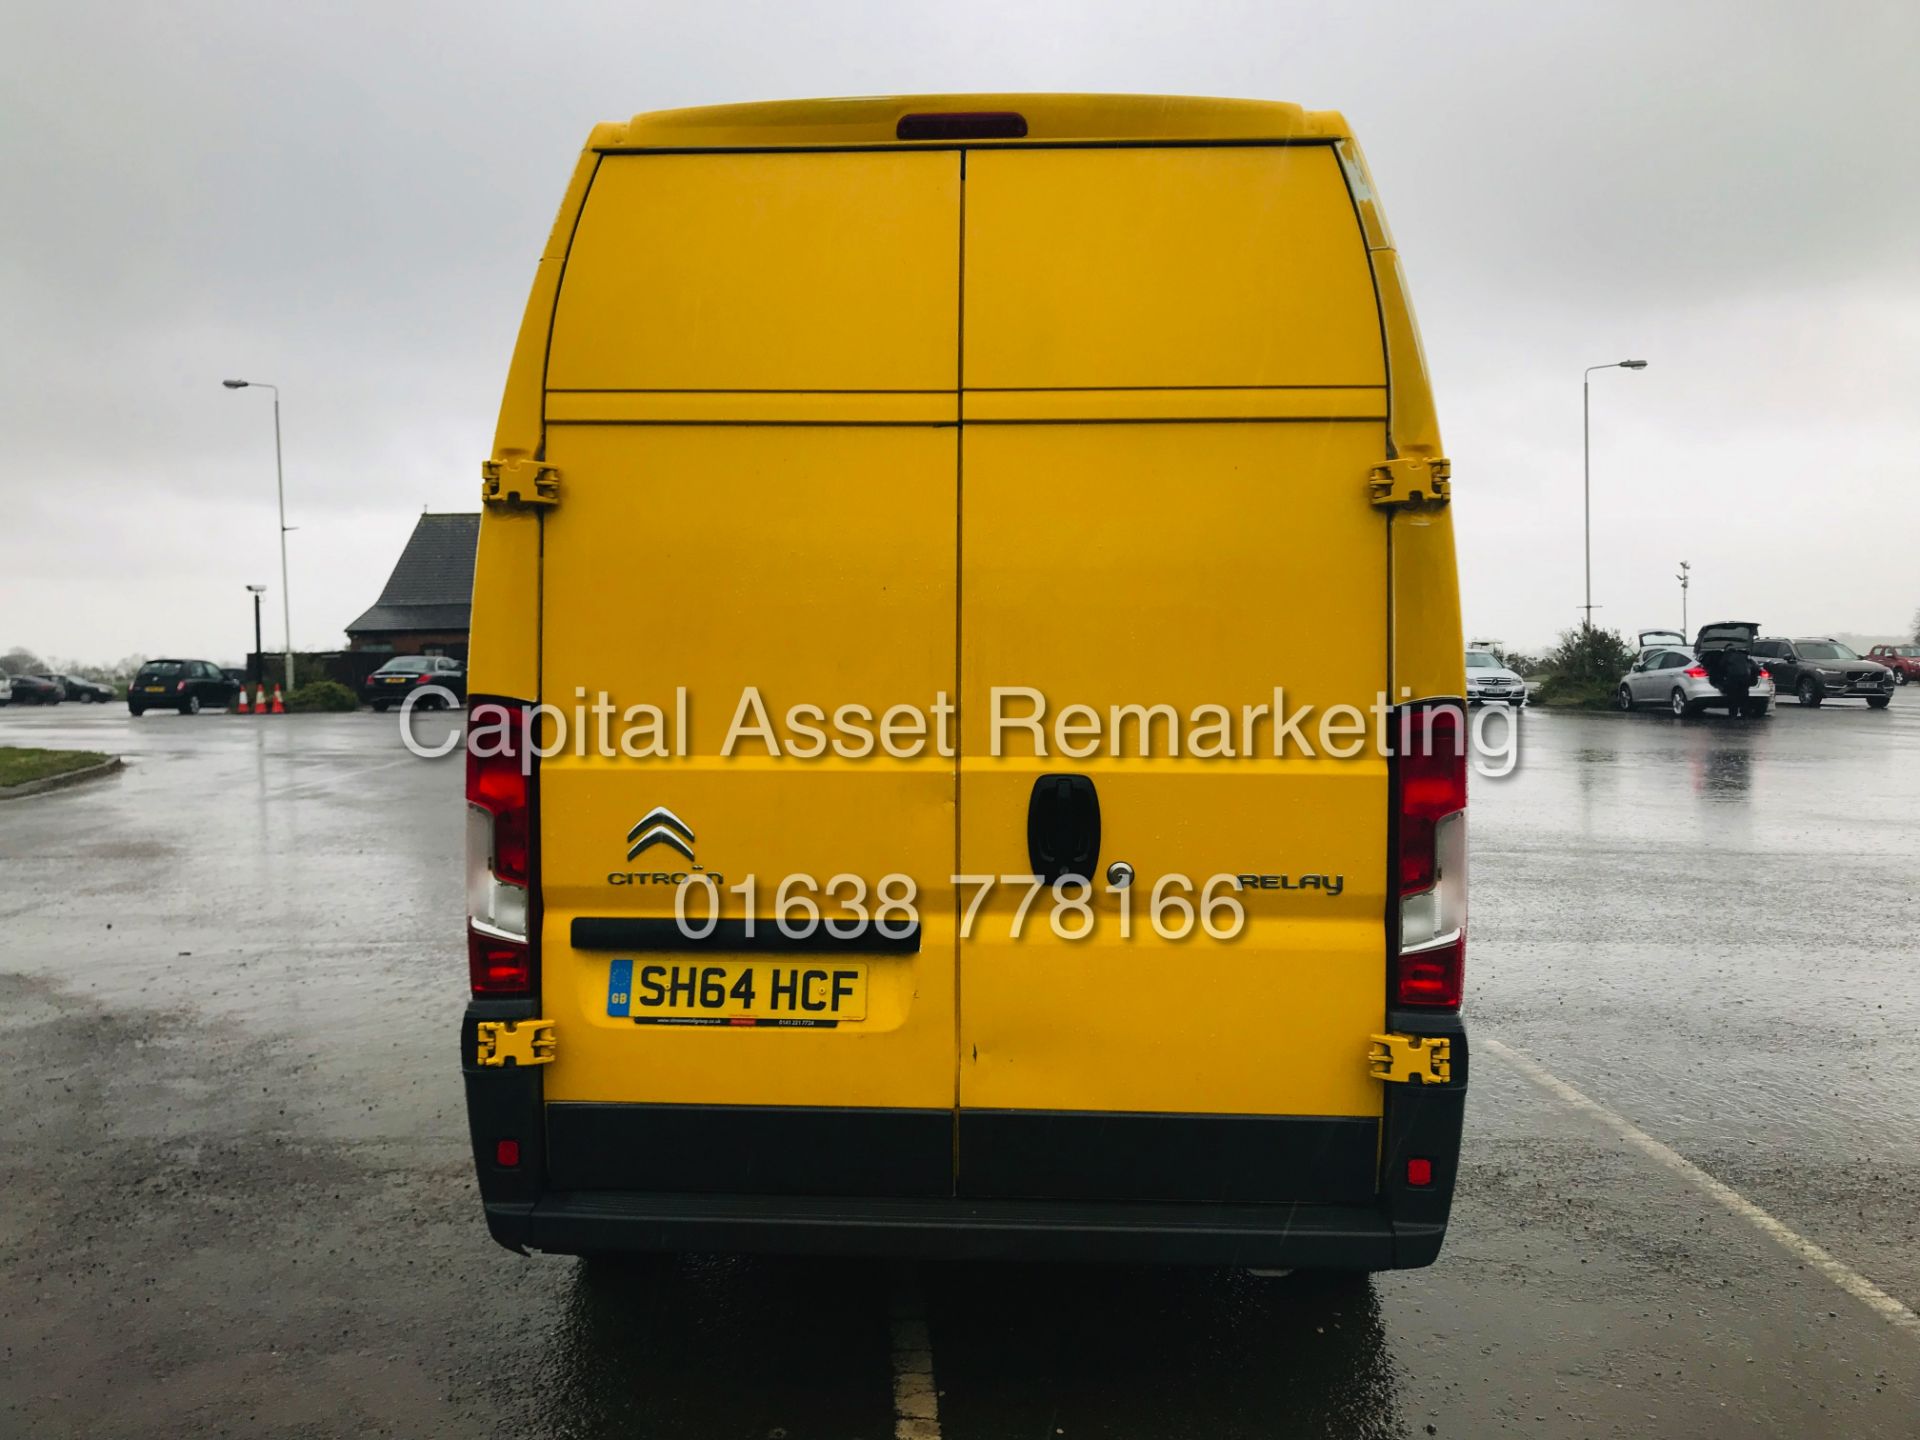 On Sale CITROEN RELAY 2.2HDI L3H3 "130BHP - 6 SPEED" (2015) 1 OWNER -ONLY 38,000 MILES IDEAL CAMPER - Image 10 of 20